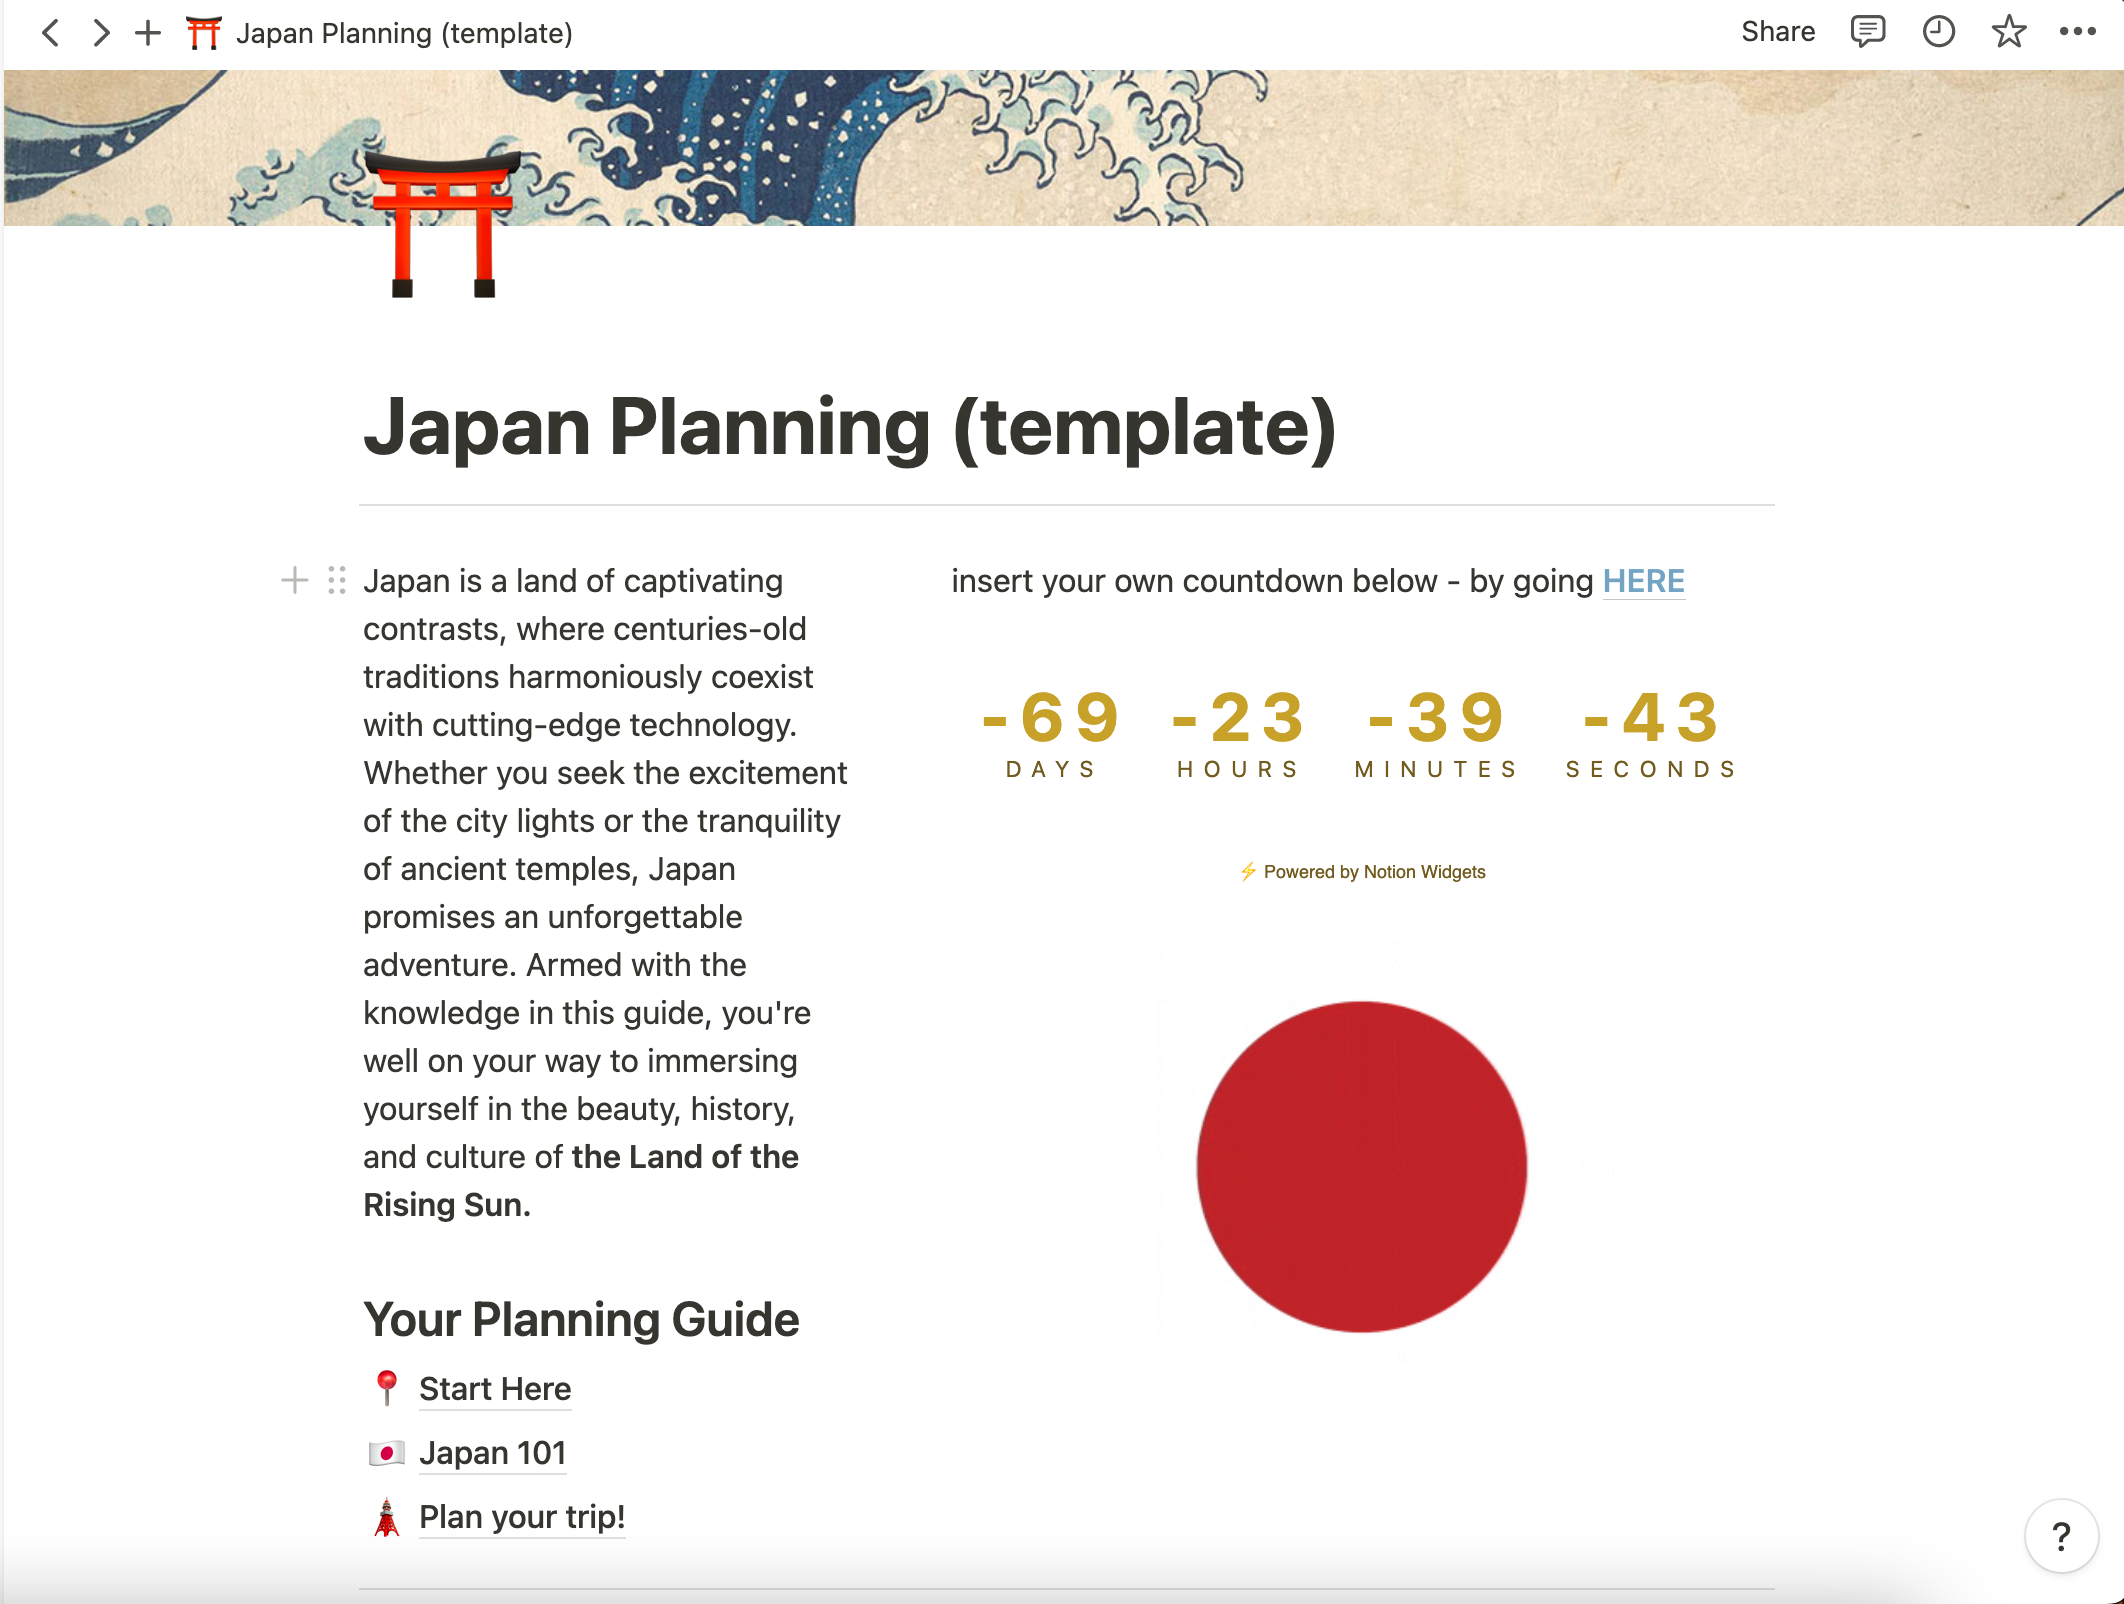 Japan Planning Guide - main page